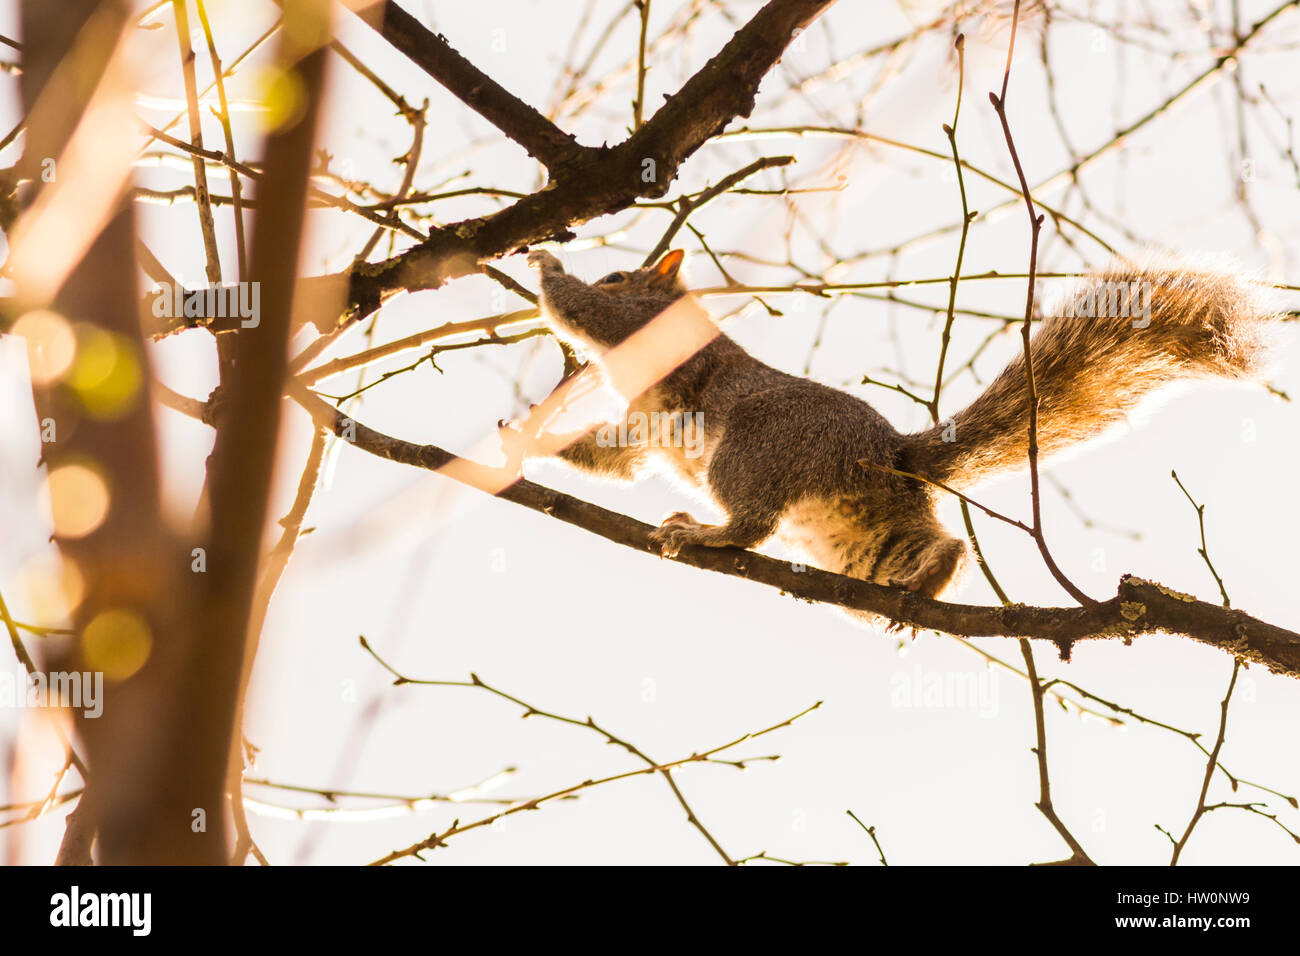 Squirrel In A Tree Getting Nuts Stock Photo